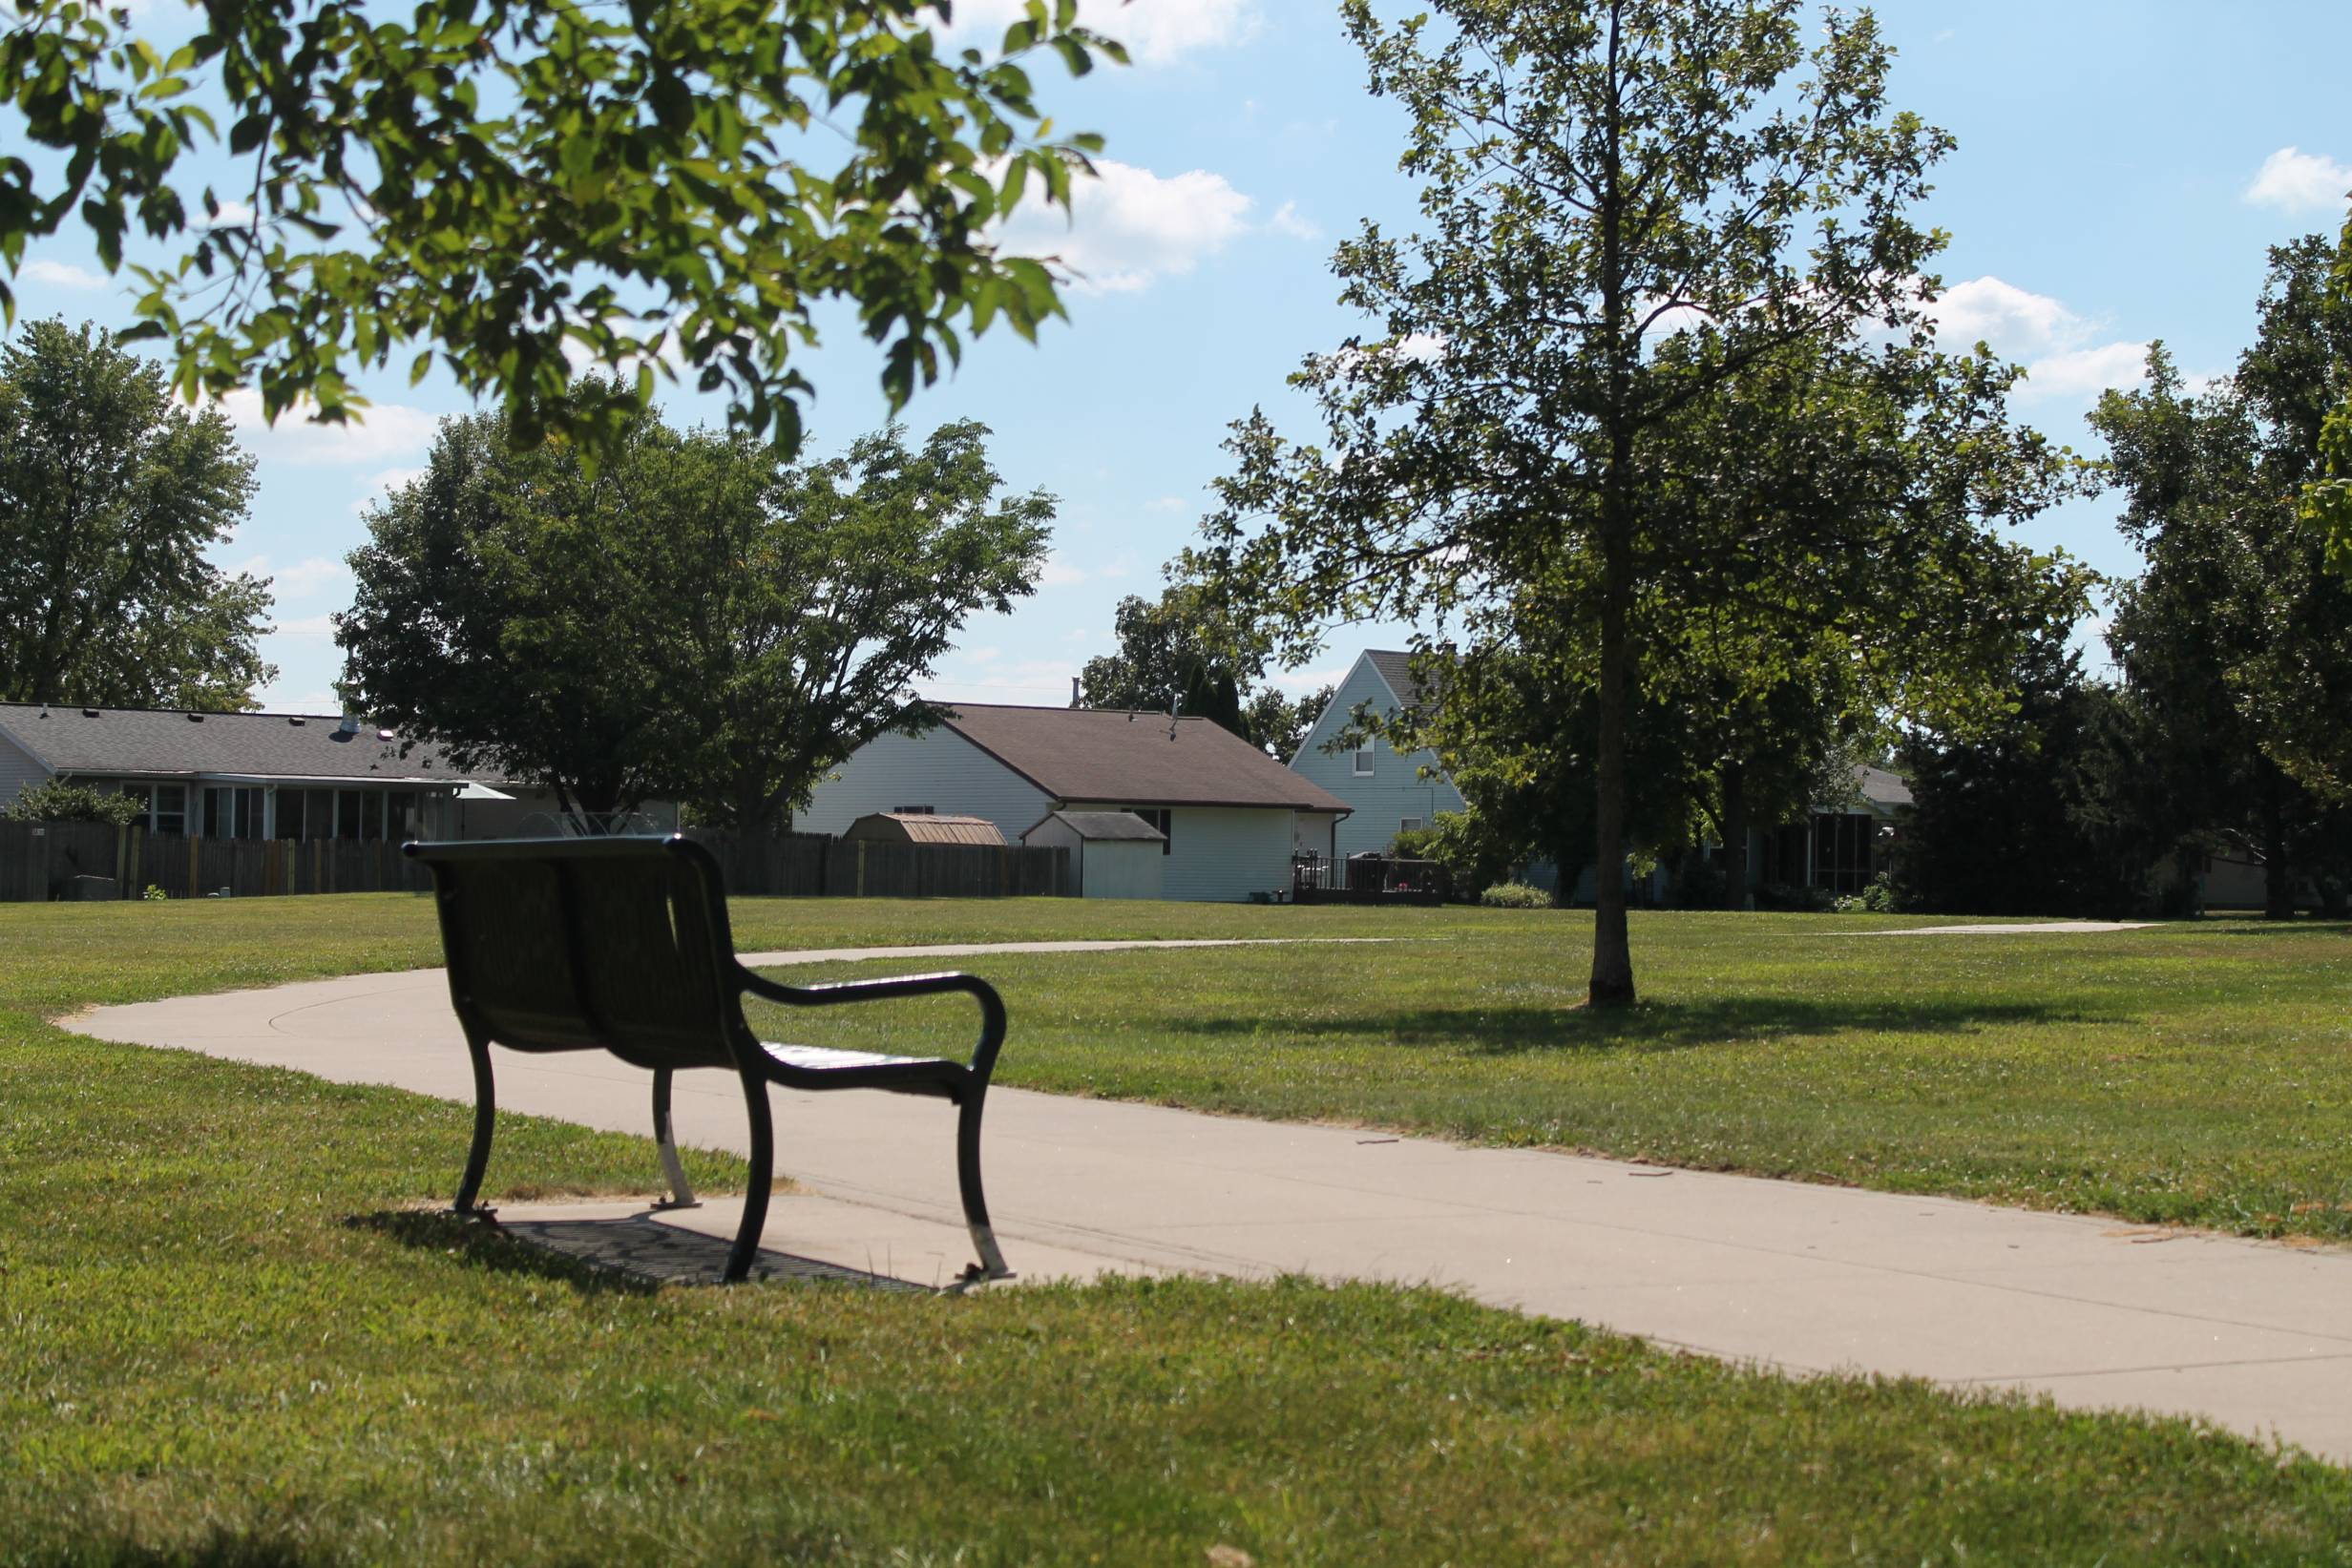 A photo of a walking path in a park with a sitting bench in the foreground 